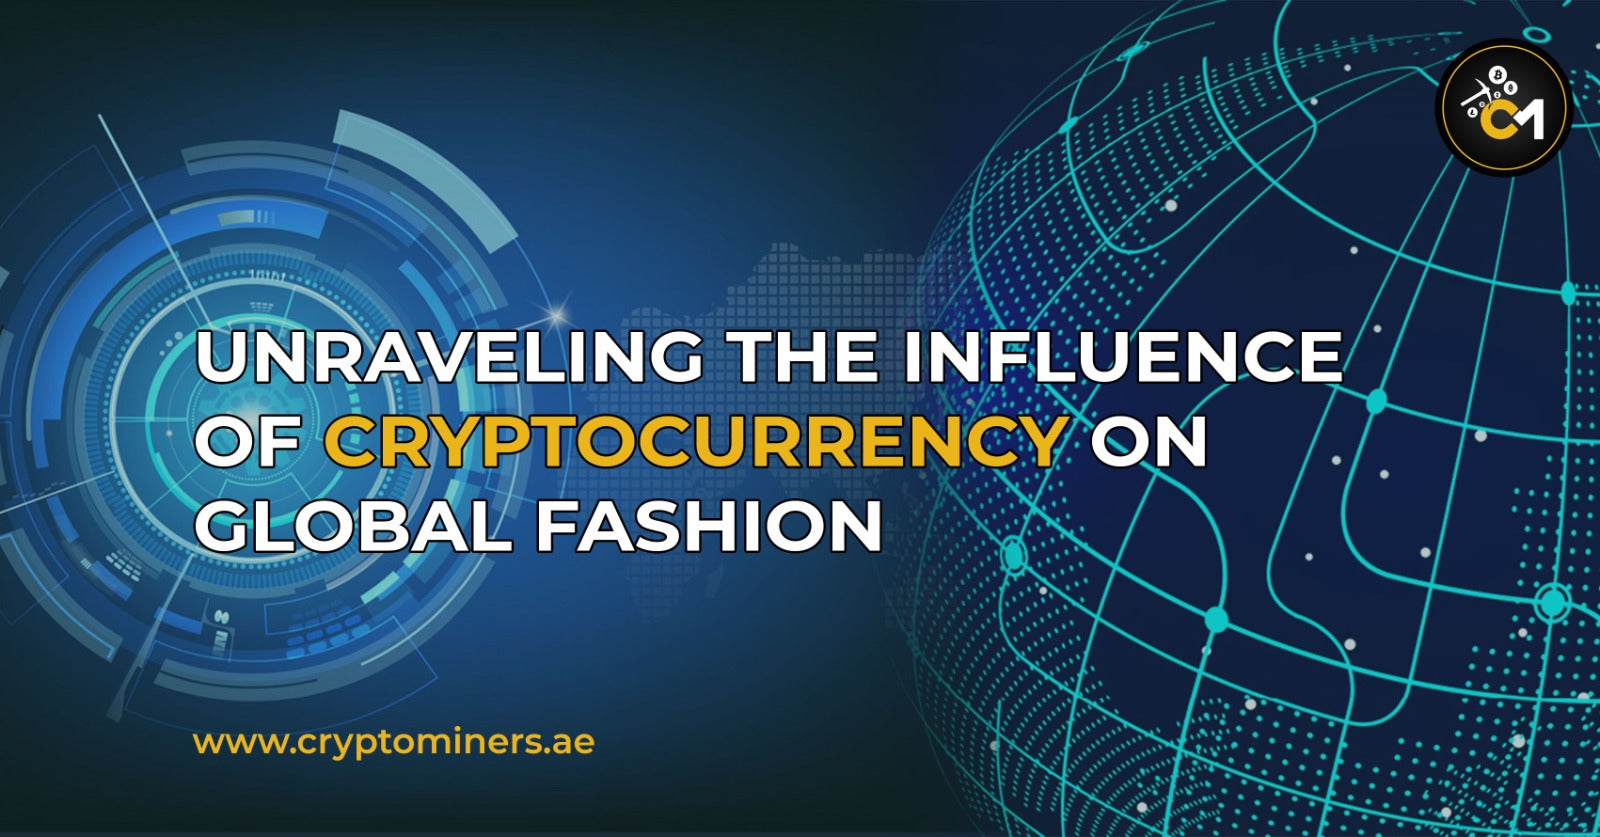 Unraveling the Influence of Cryptocurrency on Global Fashion